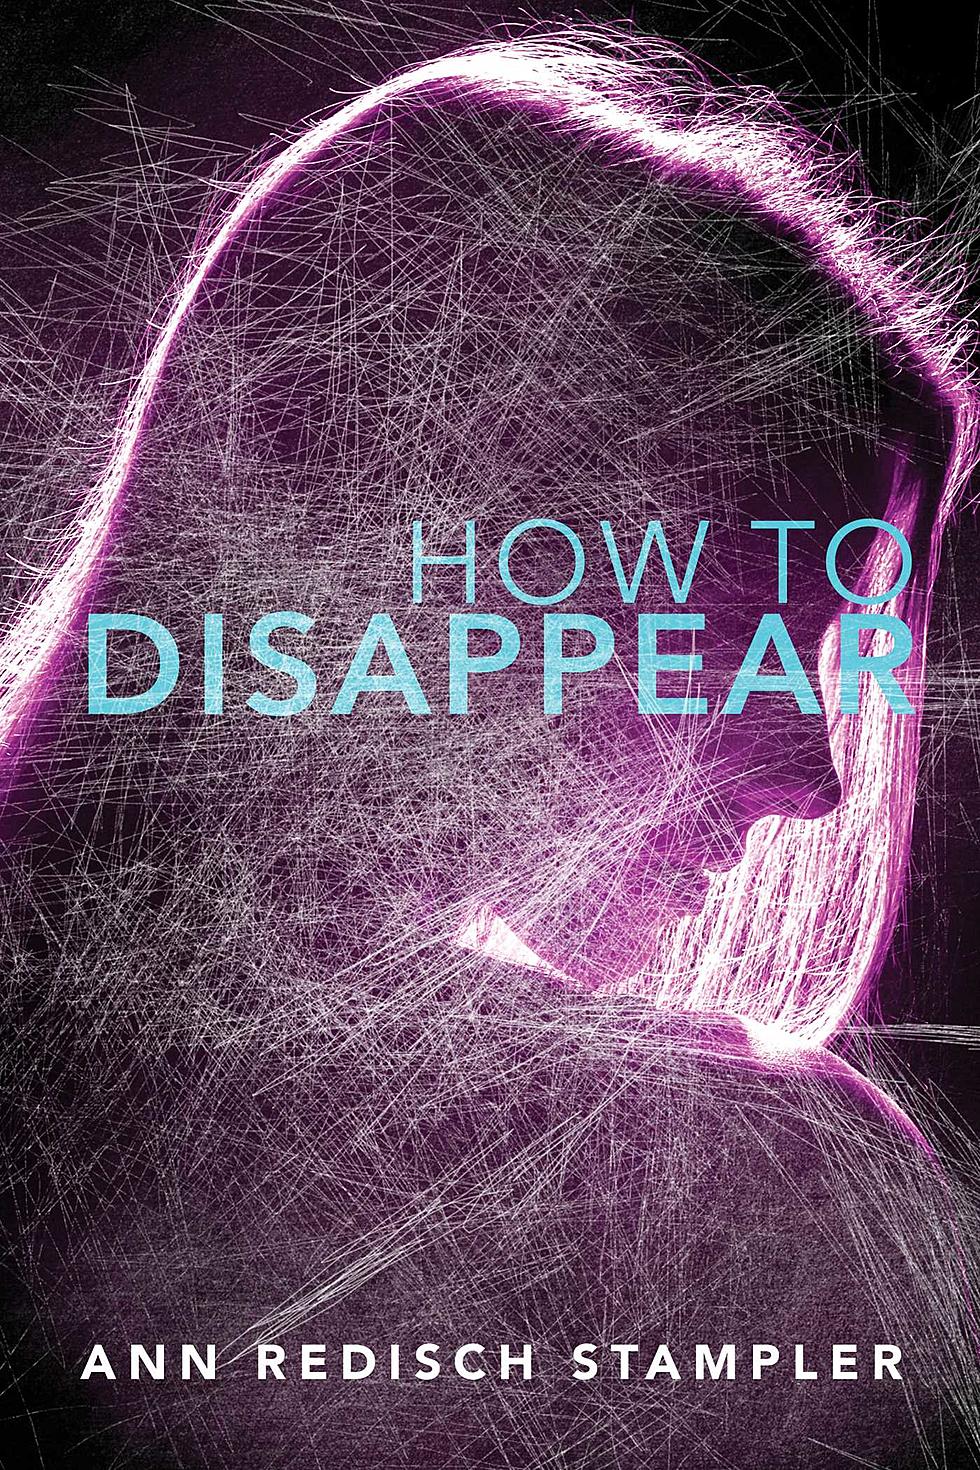 ‘How to Disappear’ by Ann Redisch Stampler: A Blood-Rush-to-the-Head Type of Thriller